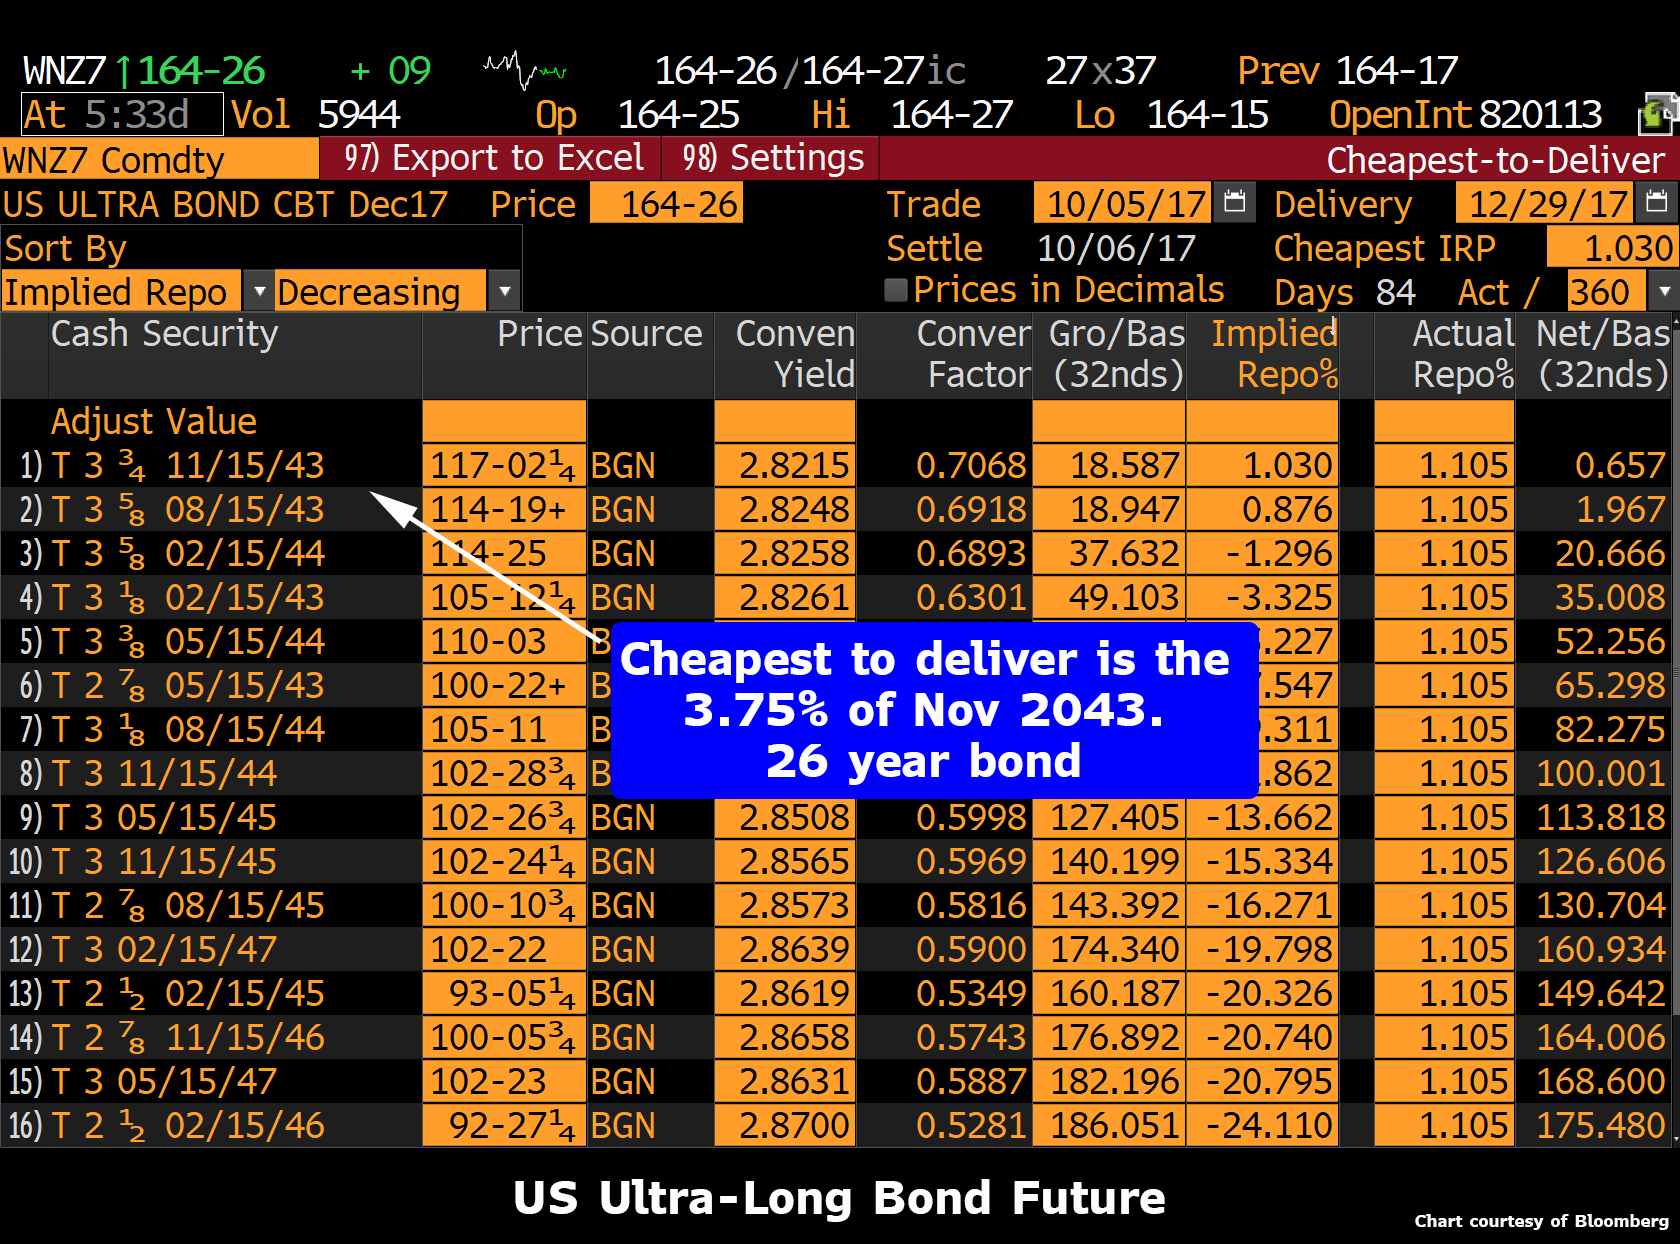 Is This The Best Way To Bet On The Fed Losing Control Of The Bond Market?